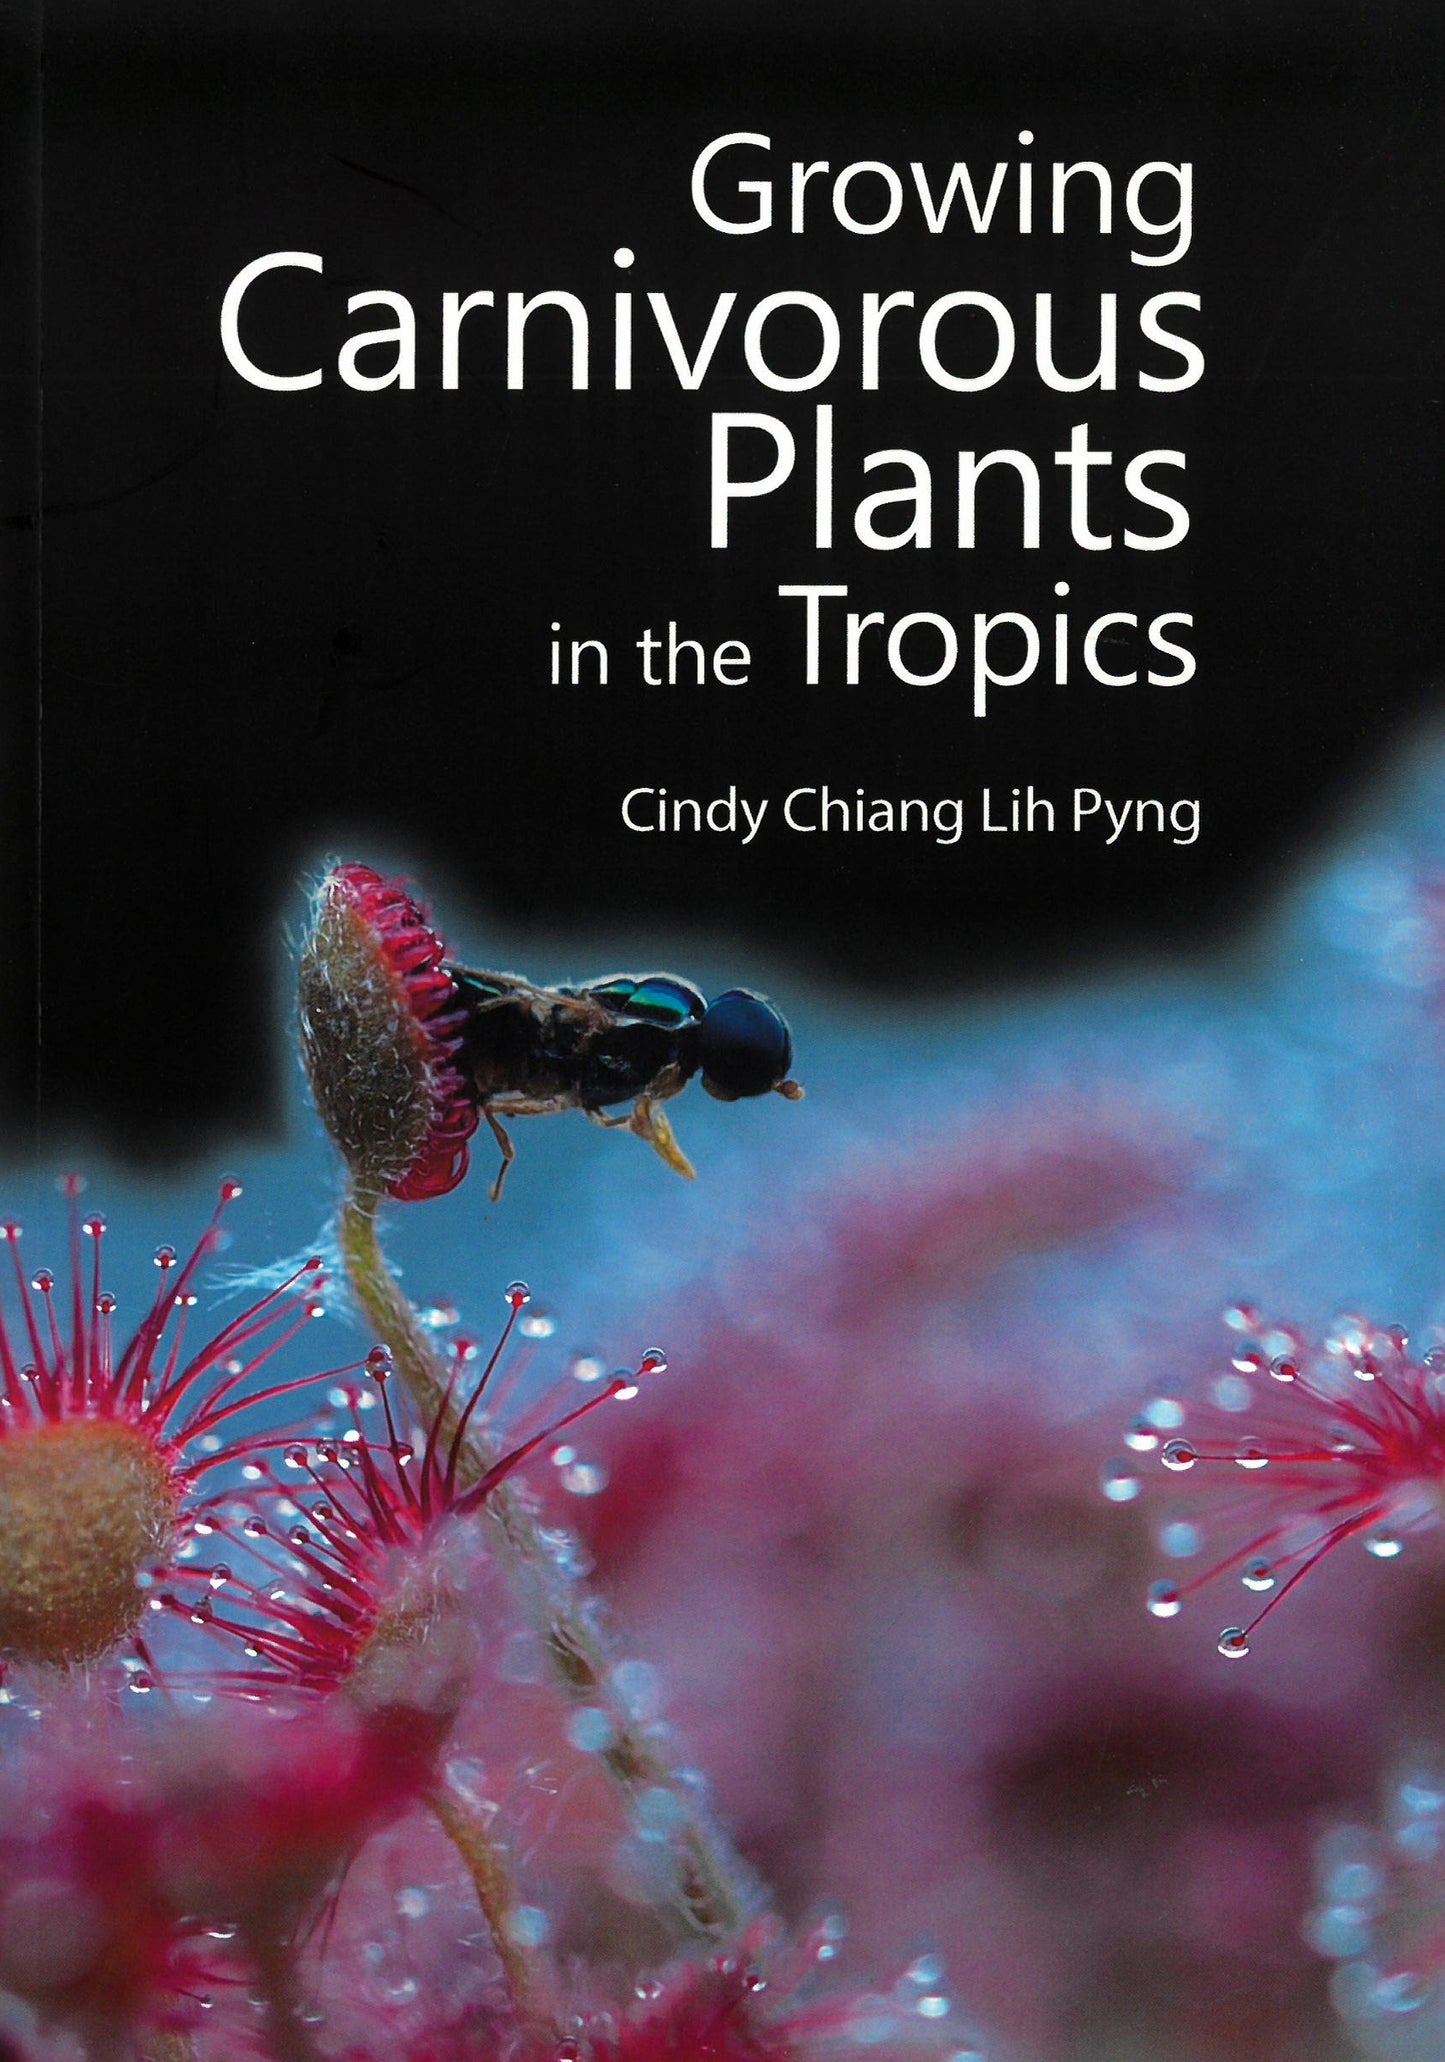 Growing Carnivorous Plants in the Tropics